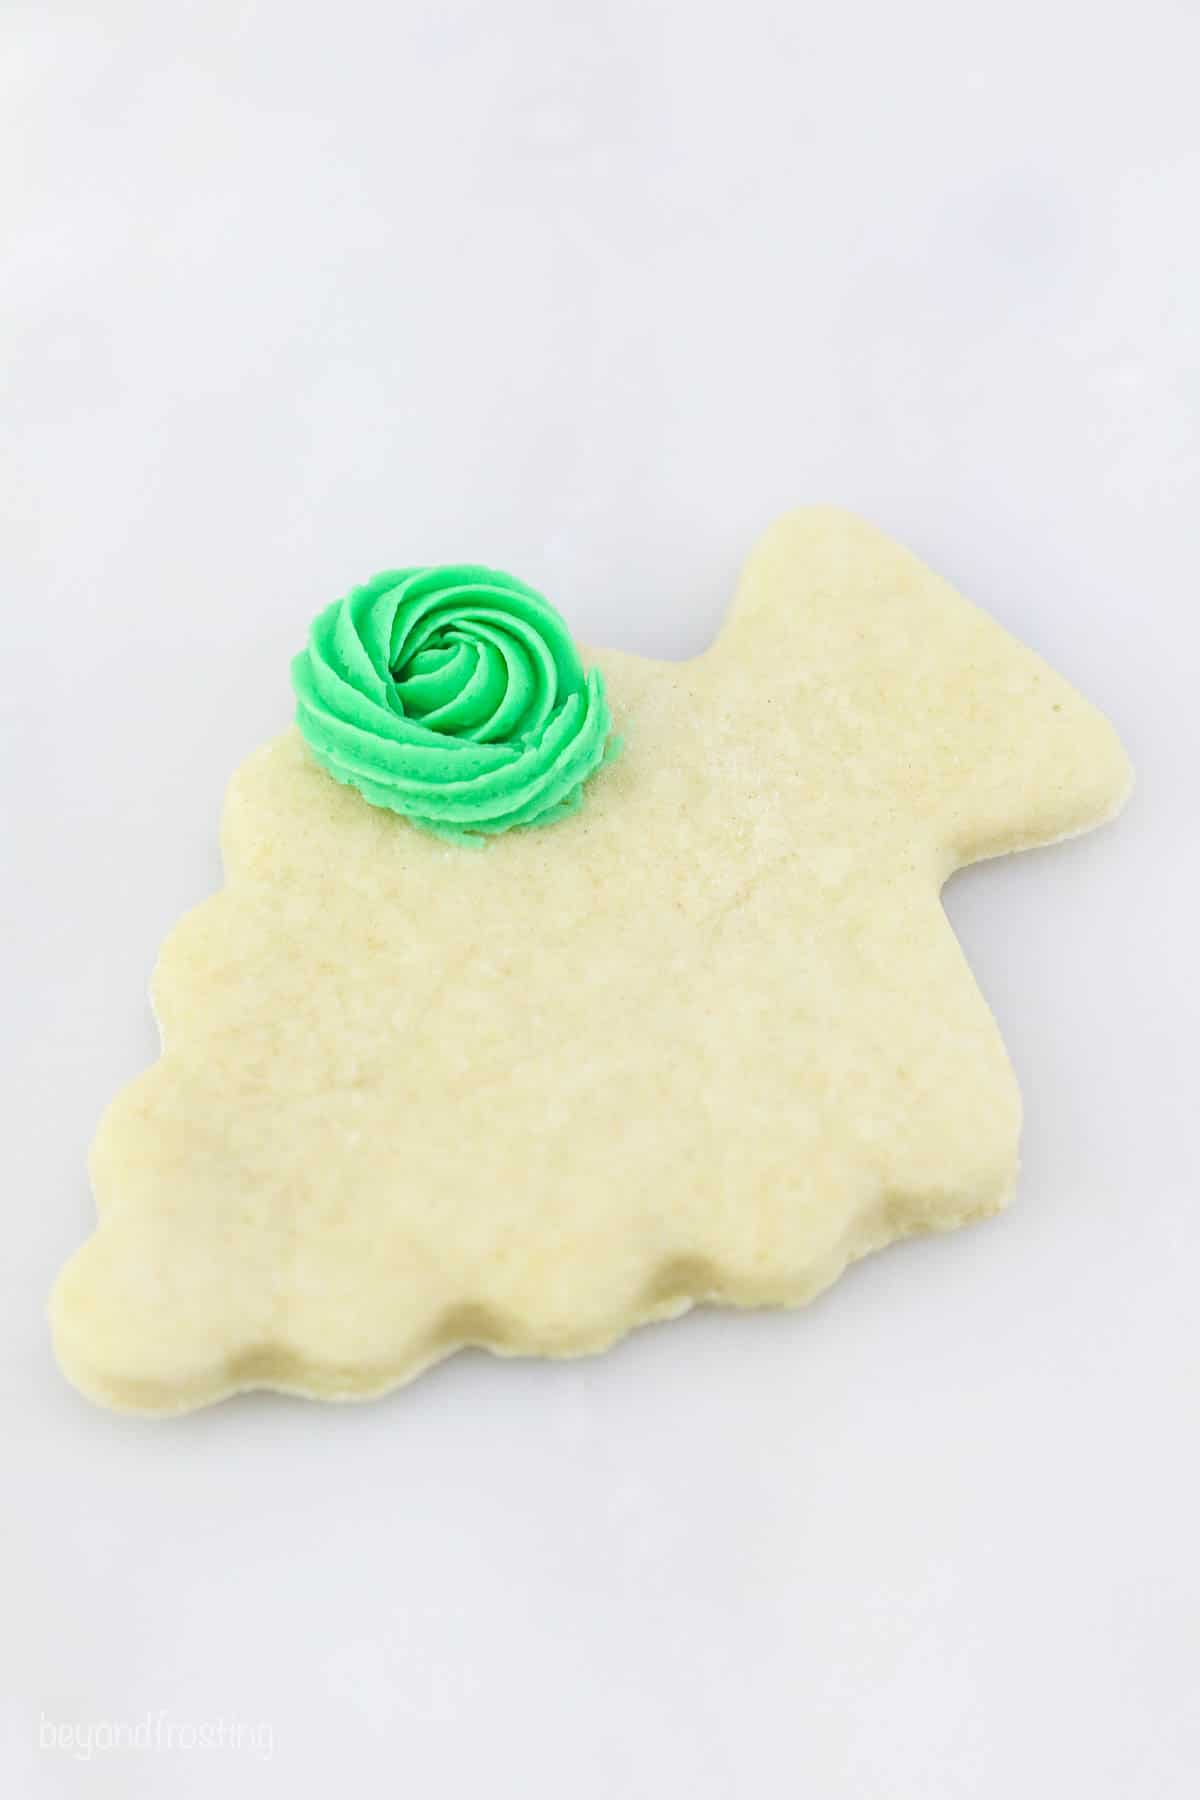 A green frosting rosette on a Christmas tree sugar cookie